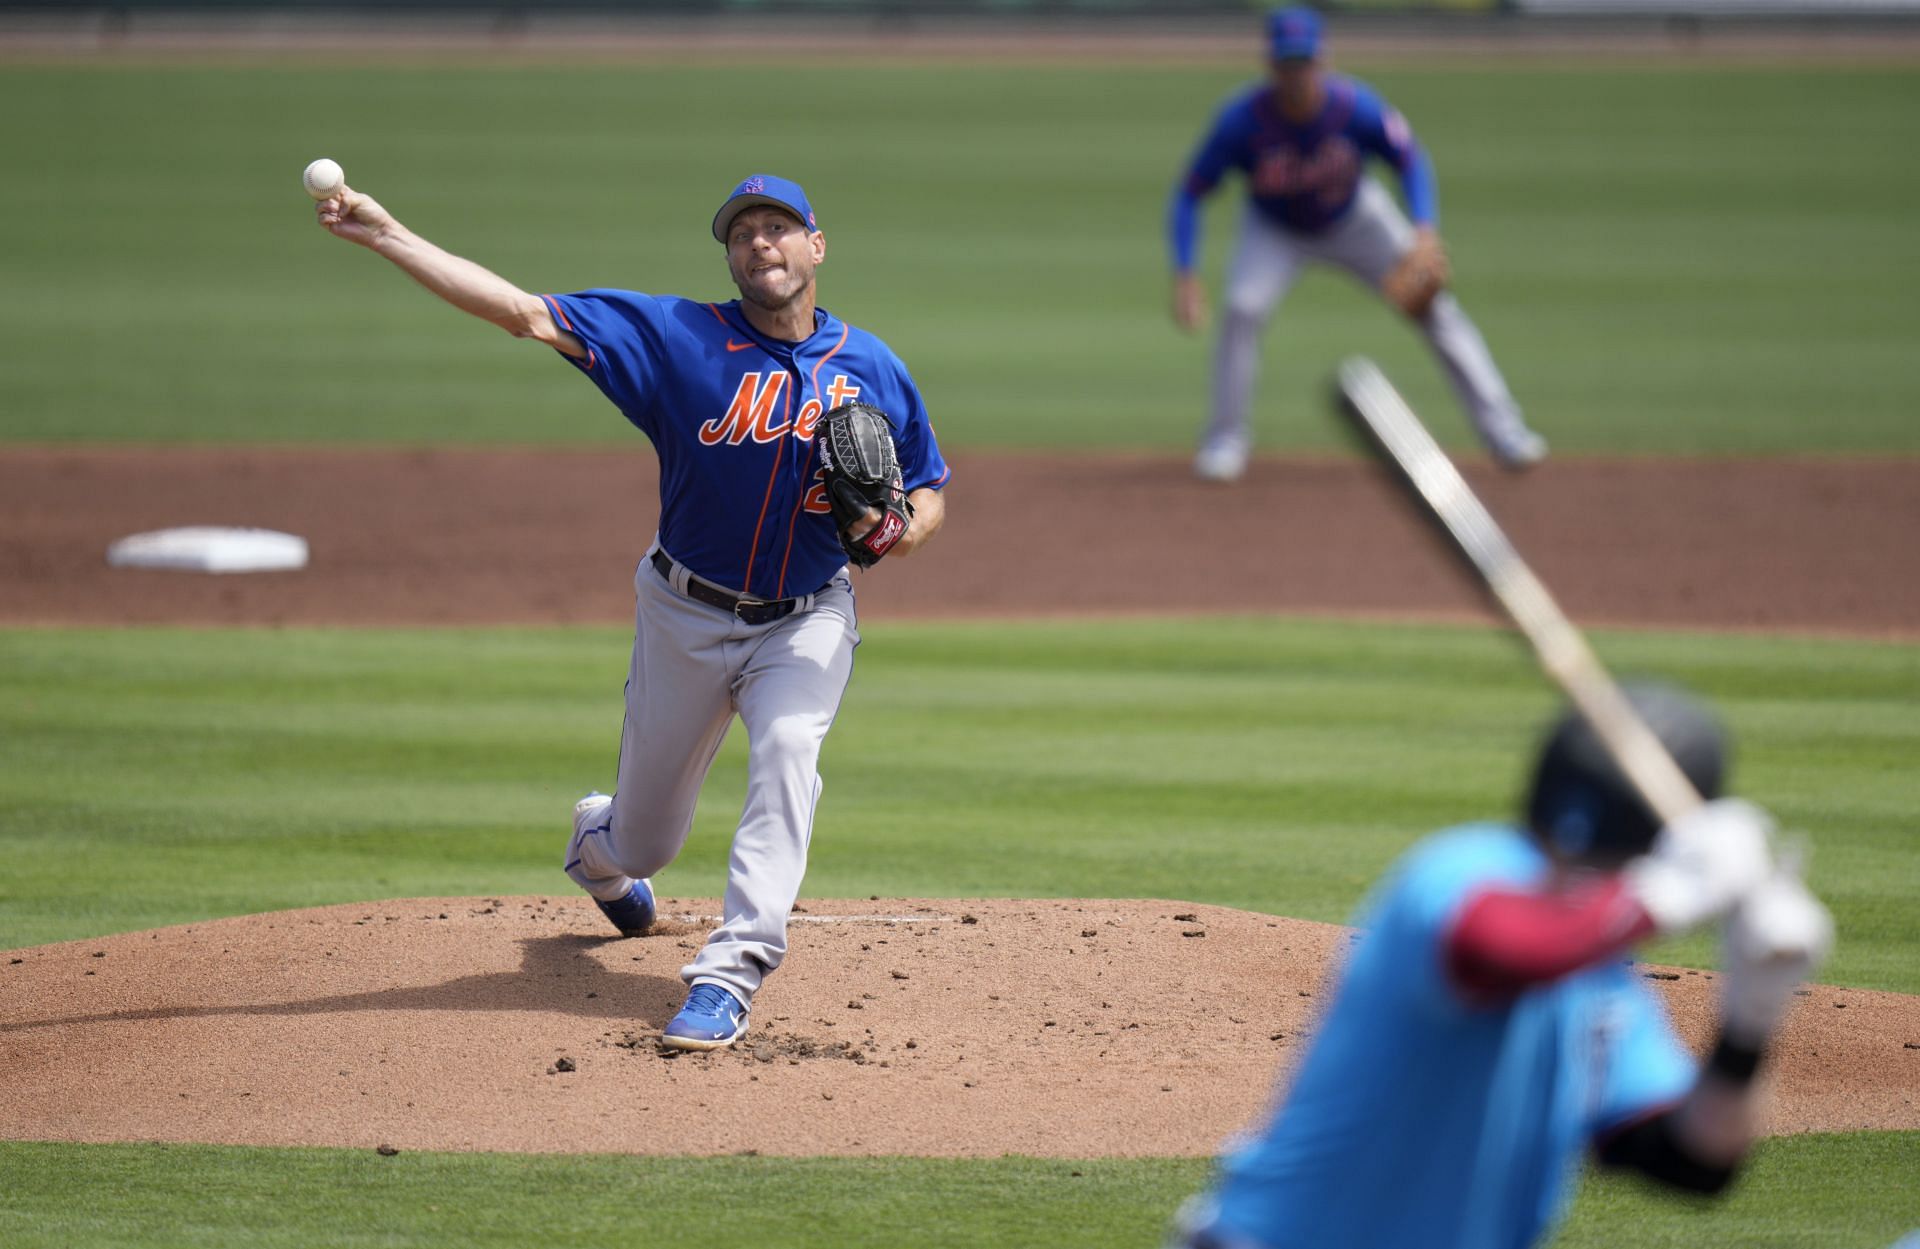 Max Scherzer gives the Mets something most teams dream of, 2 superstar aces